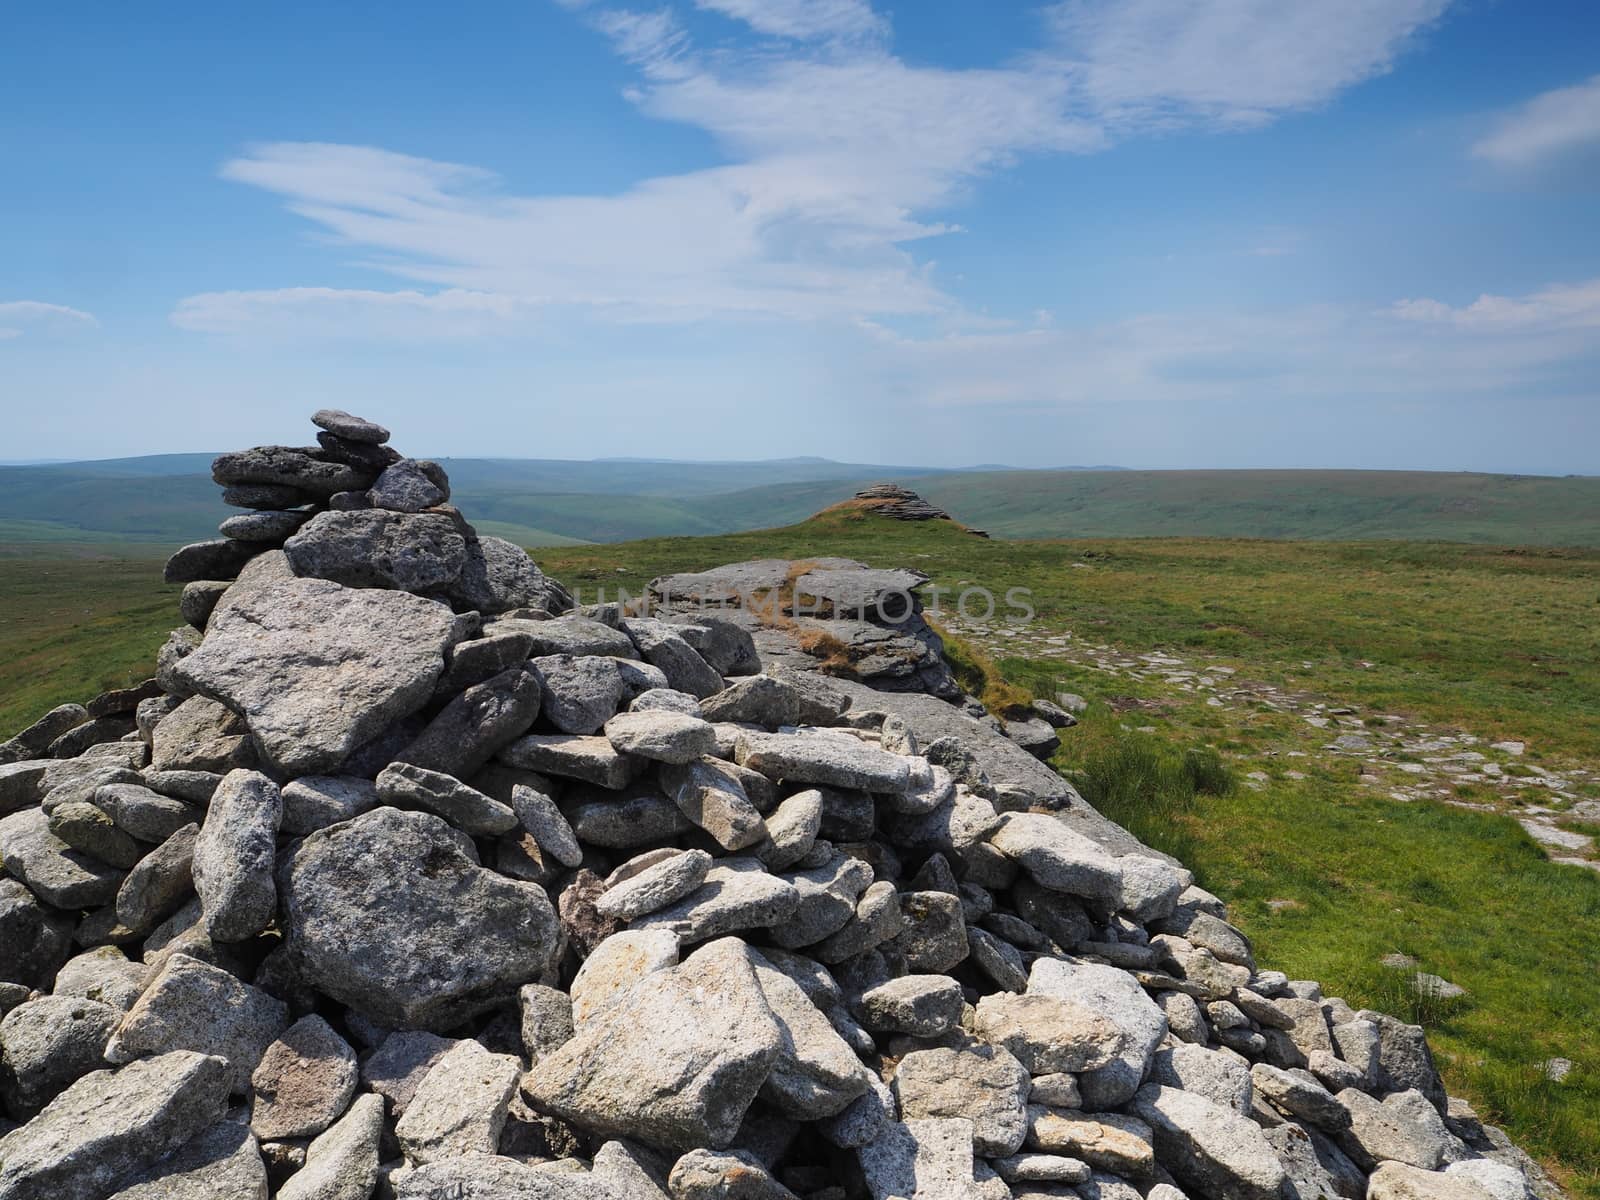 View from High Willhays cairn with white clouds in a blue sky, Dartmoor National Park, Devon, UK